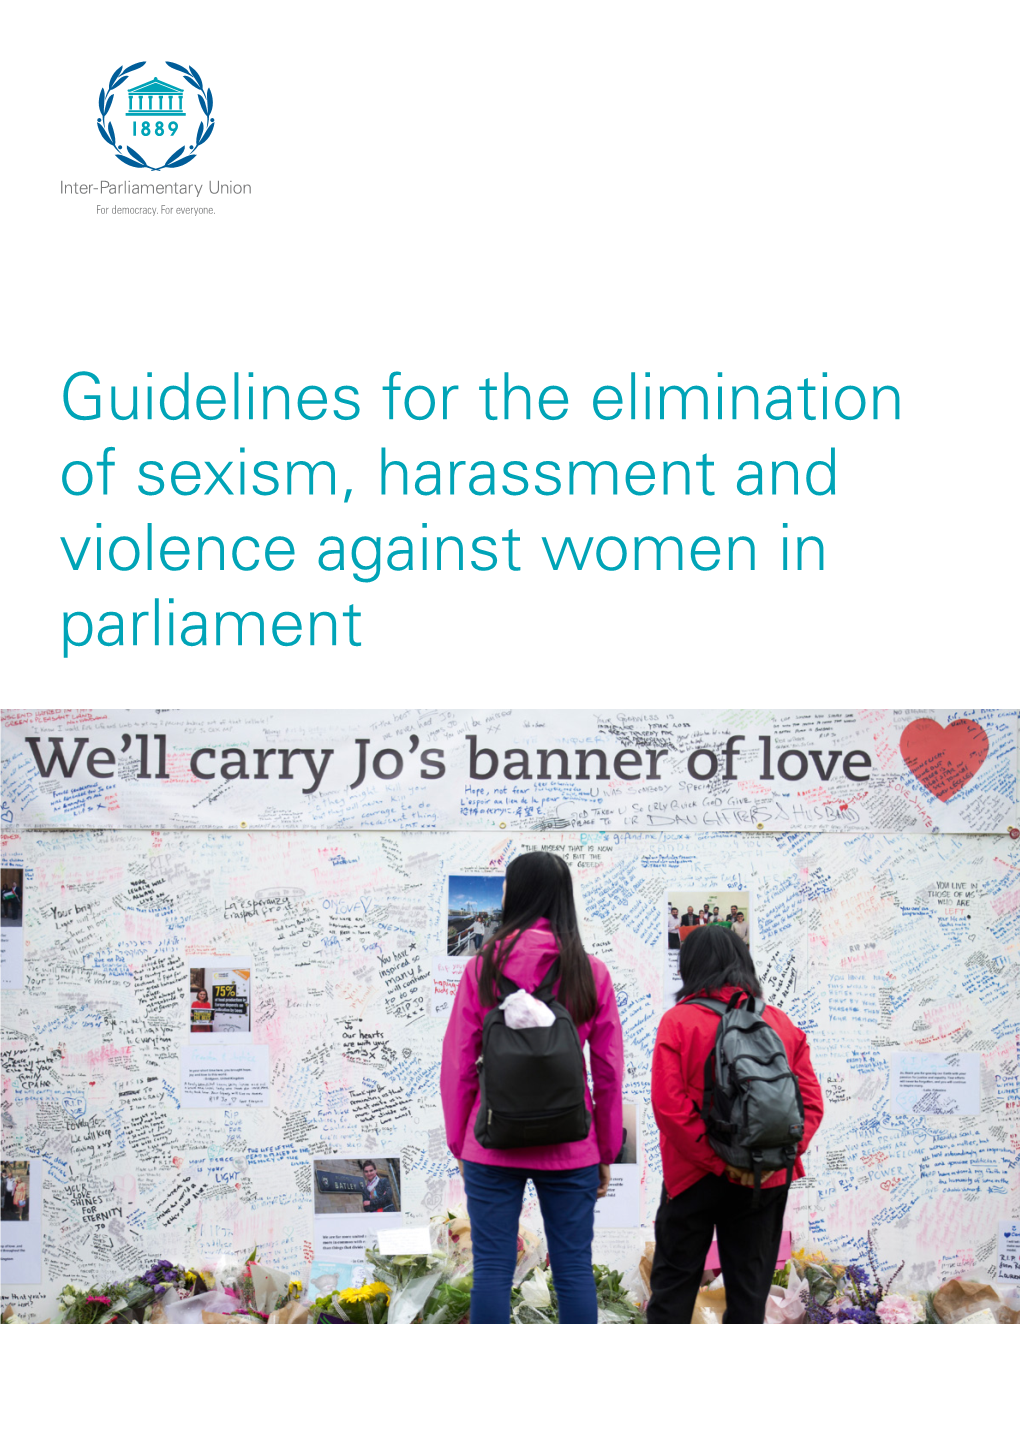 Guidelines for the Elimination of Sexism, Harassment and Violence Against Women in Parliament © Inter-Parliamentary Union (IPU), 2019